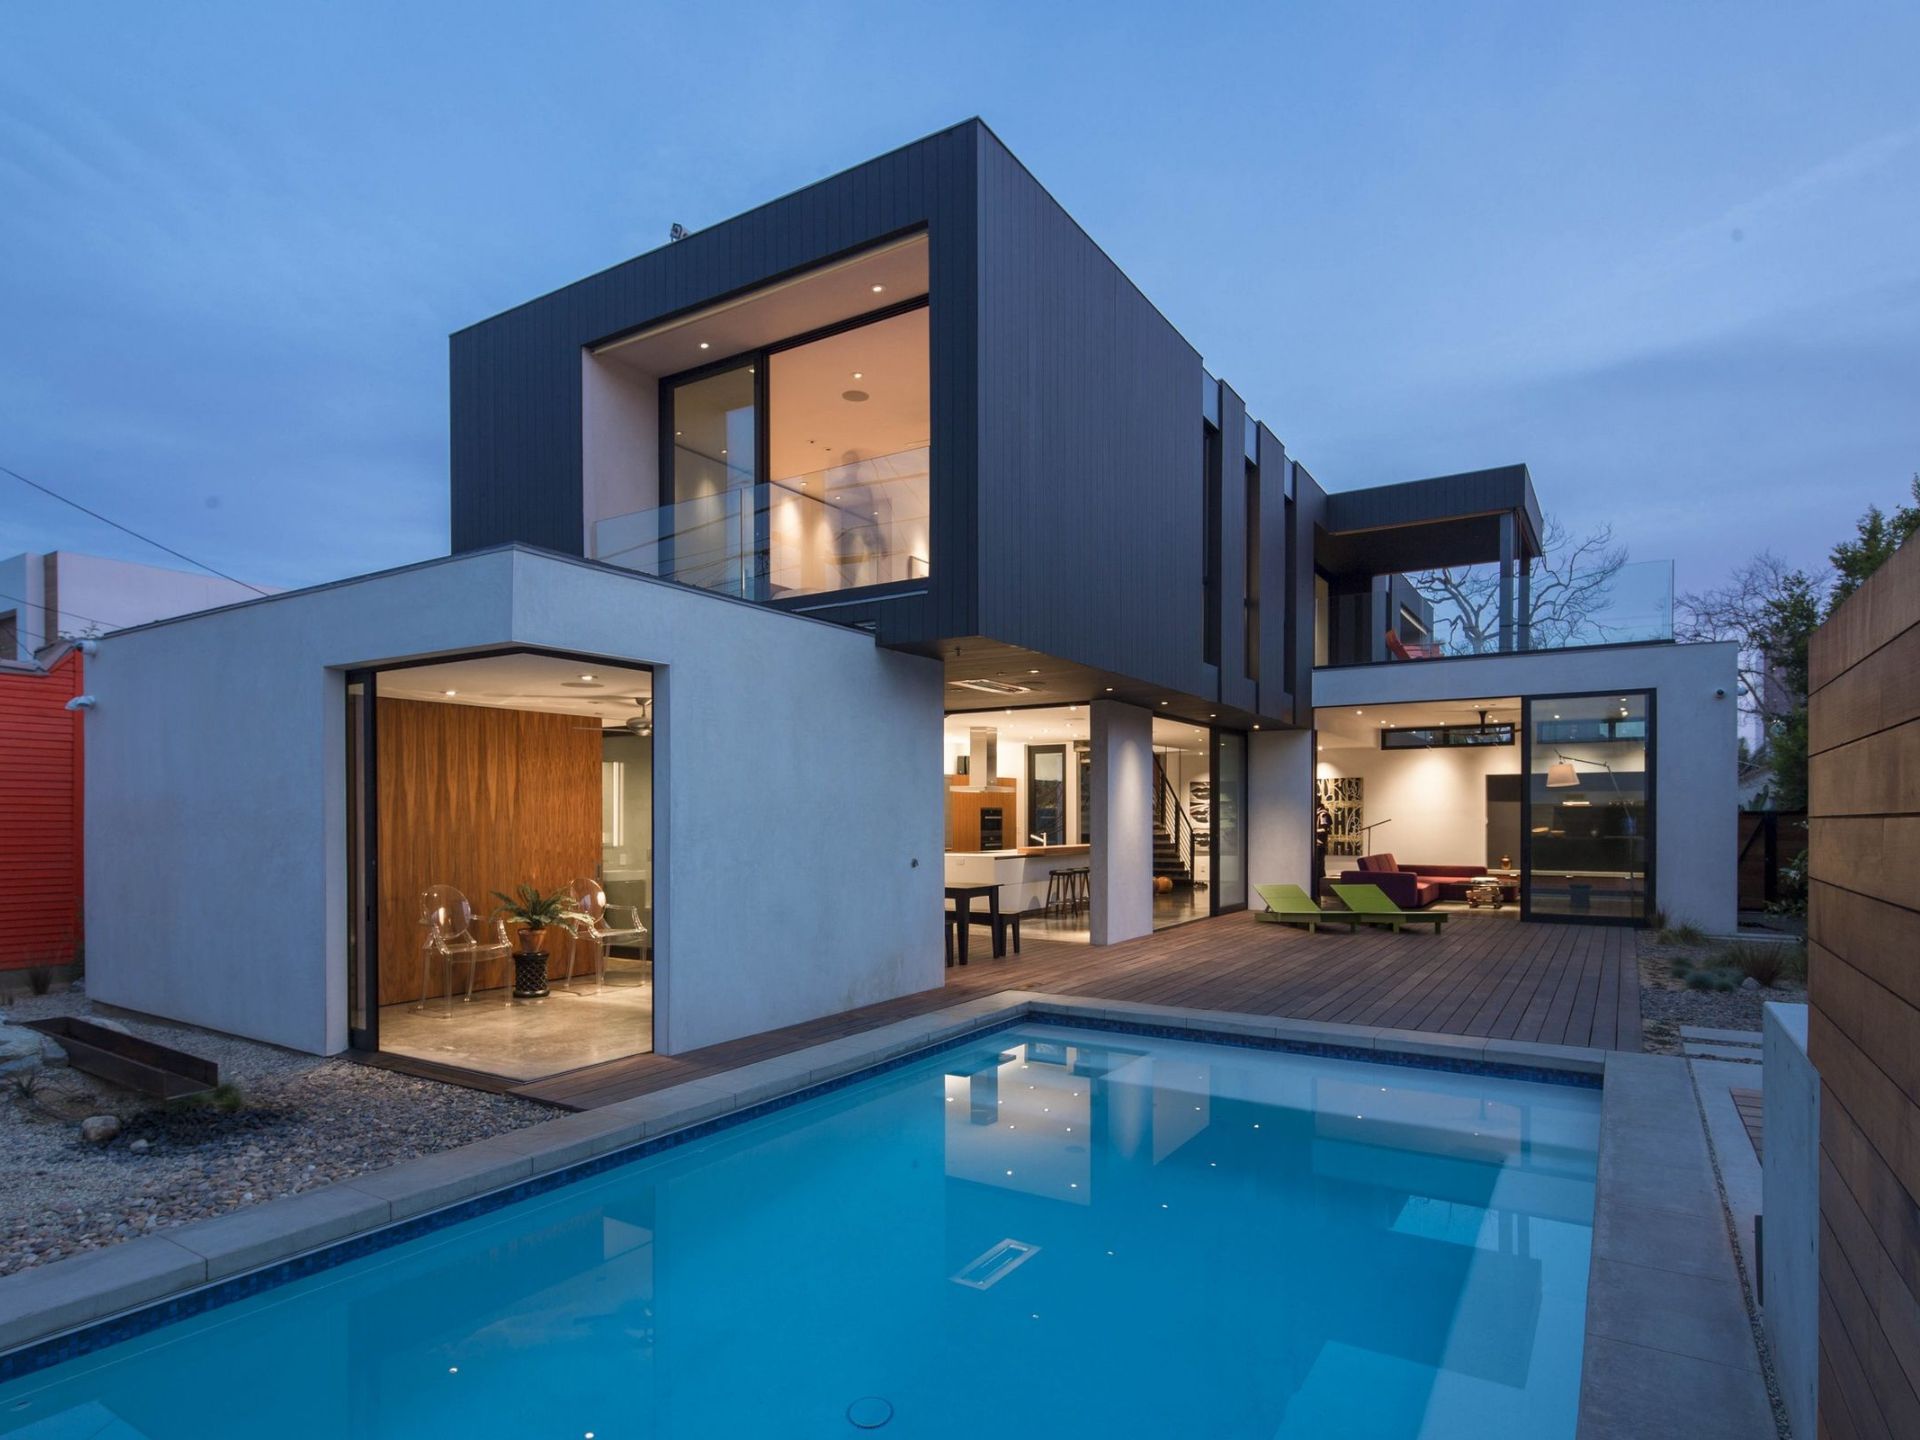 Two boxes house with a pool in backyard